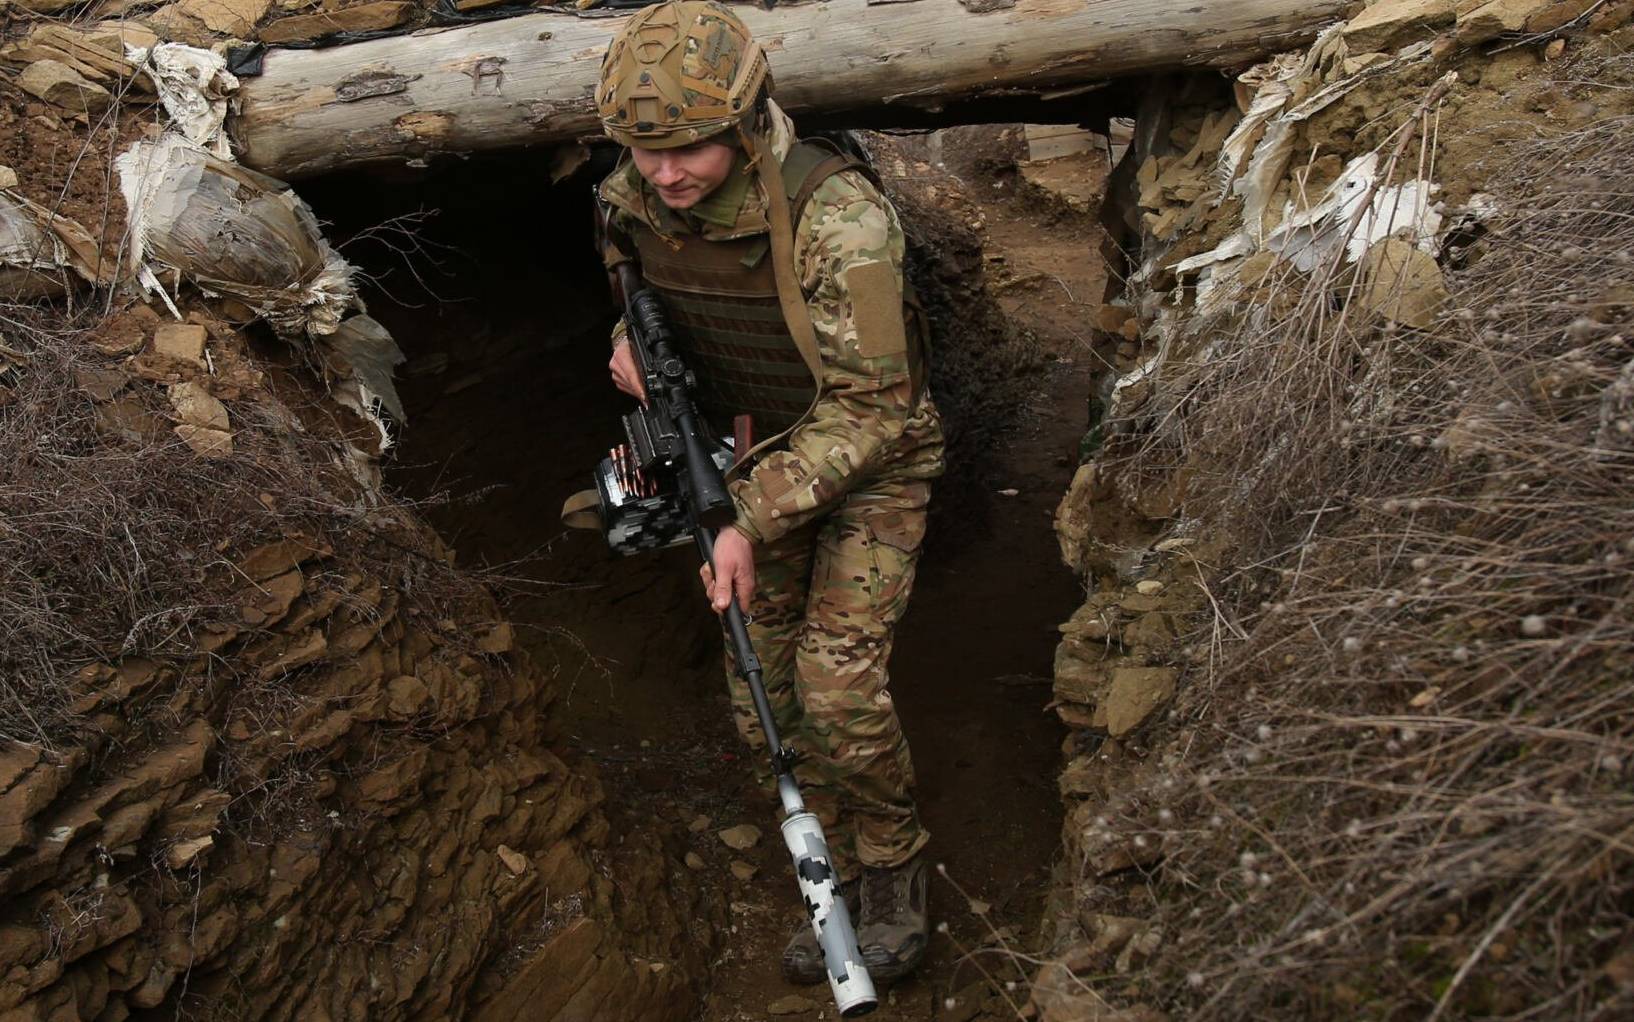 A Ukrainian serviceman walks along a trench at a position on the front line with Russia-backed separatists near the settlement of Troitske in the Lugansk region on February 22, 2022, a day after Russia recognised east Ukraine's separatist republics and ordered the Russian army to send troops there as "peacekeepers". - The recognition of Donetsk and Lugansk rebel republics effectively buries the fragile peace process regulating the conflict in eastern Ukraine, known as the Minsk accords. Russian President recognised the rebels despite the West repeatedly warning him not to and threatening Moscow with a massive sanctions response. (Photo by Anatolii STEPANOV / AFP)